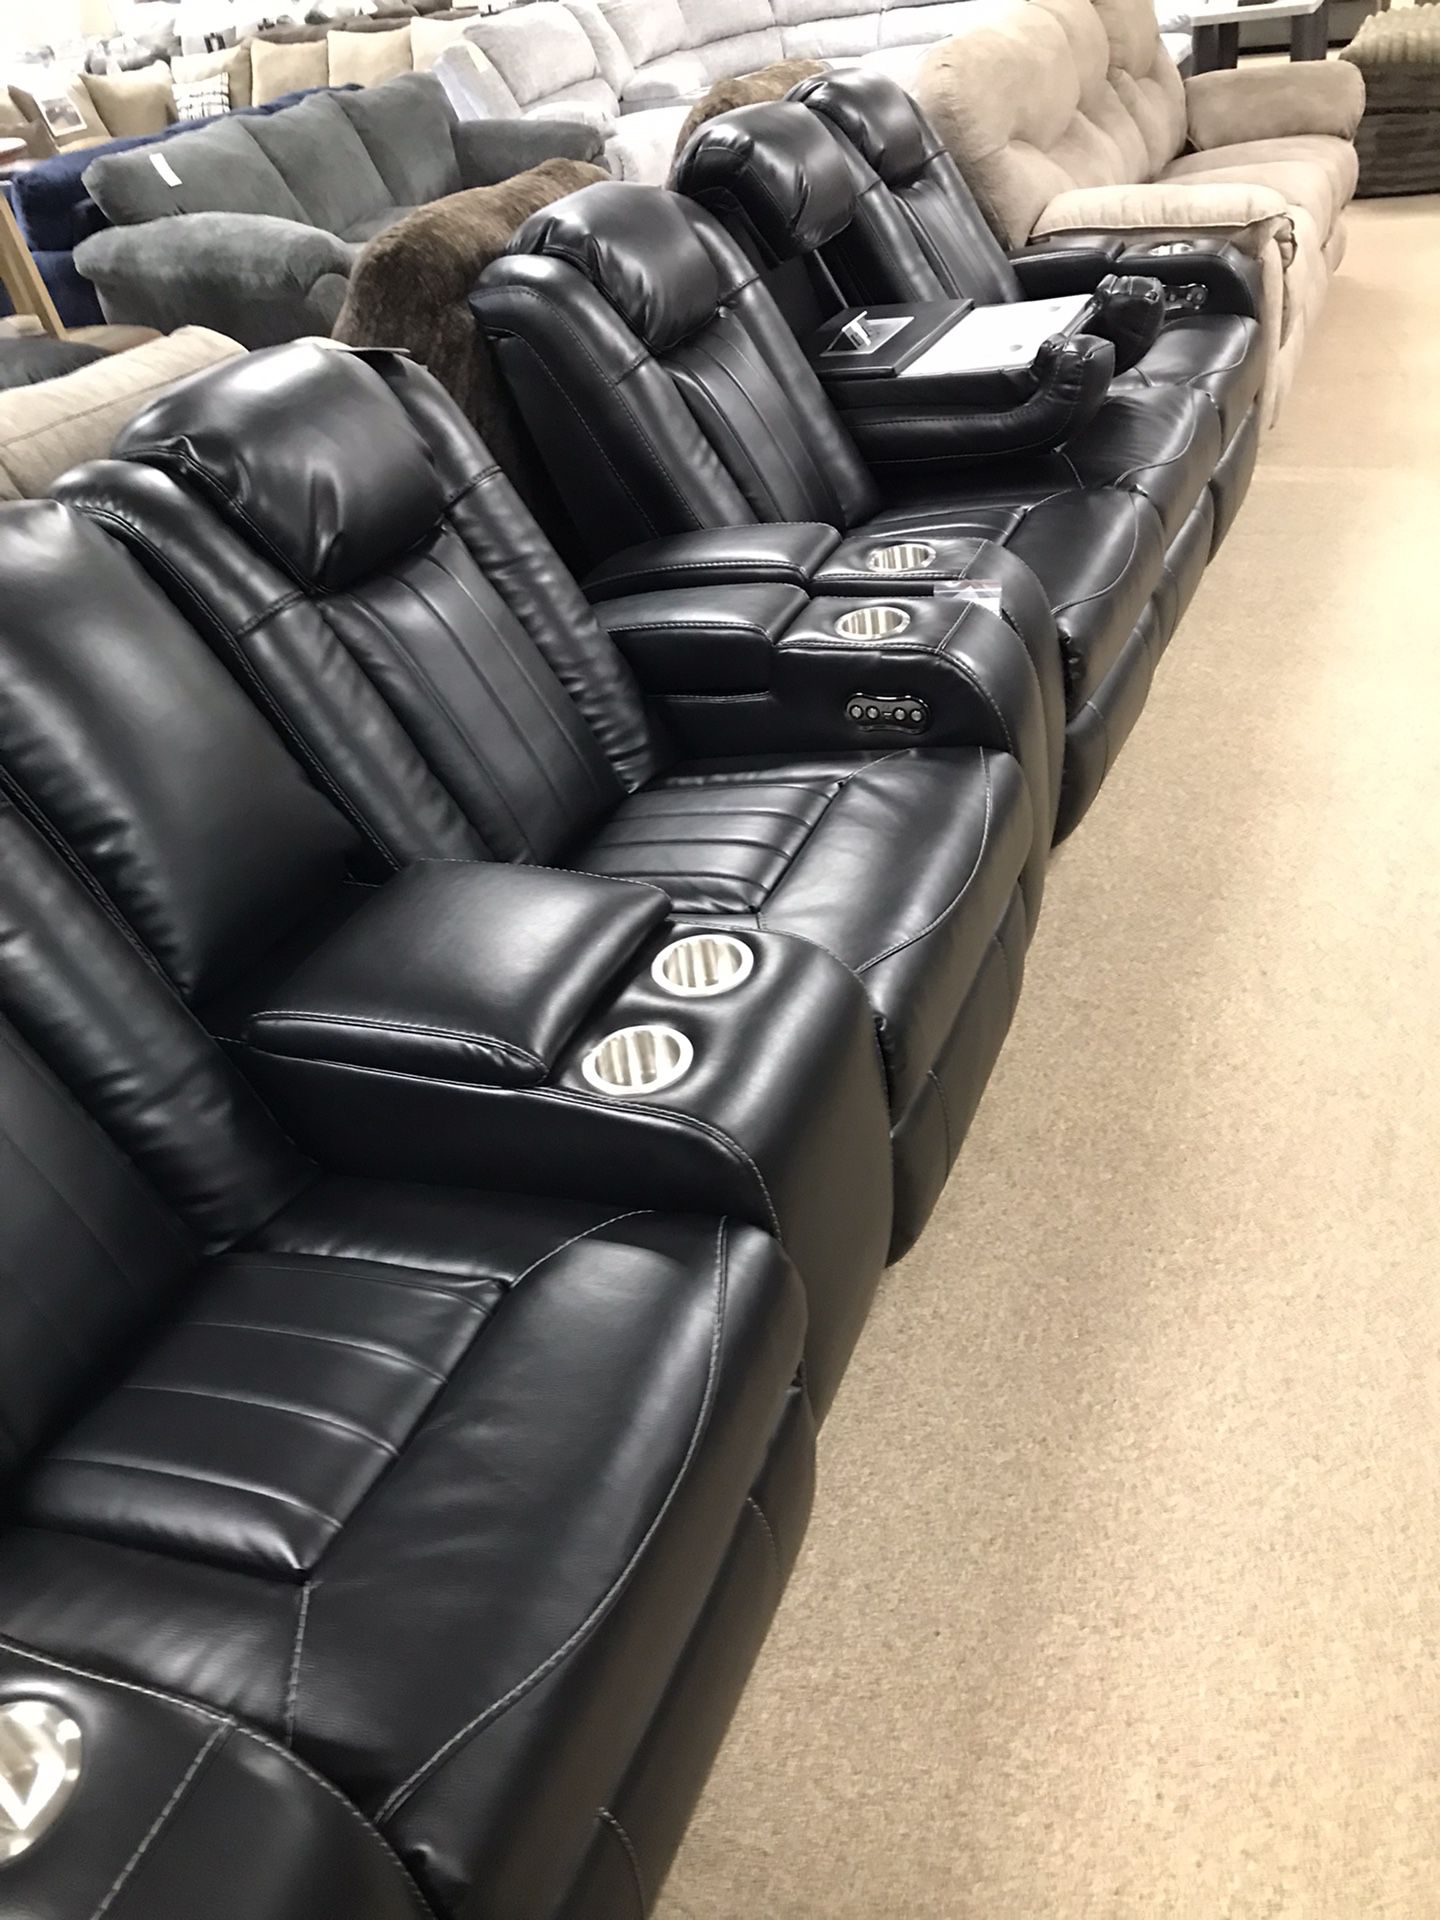 Major Leather Couch And Sectional Blowout Sale